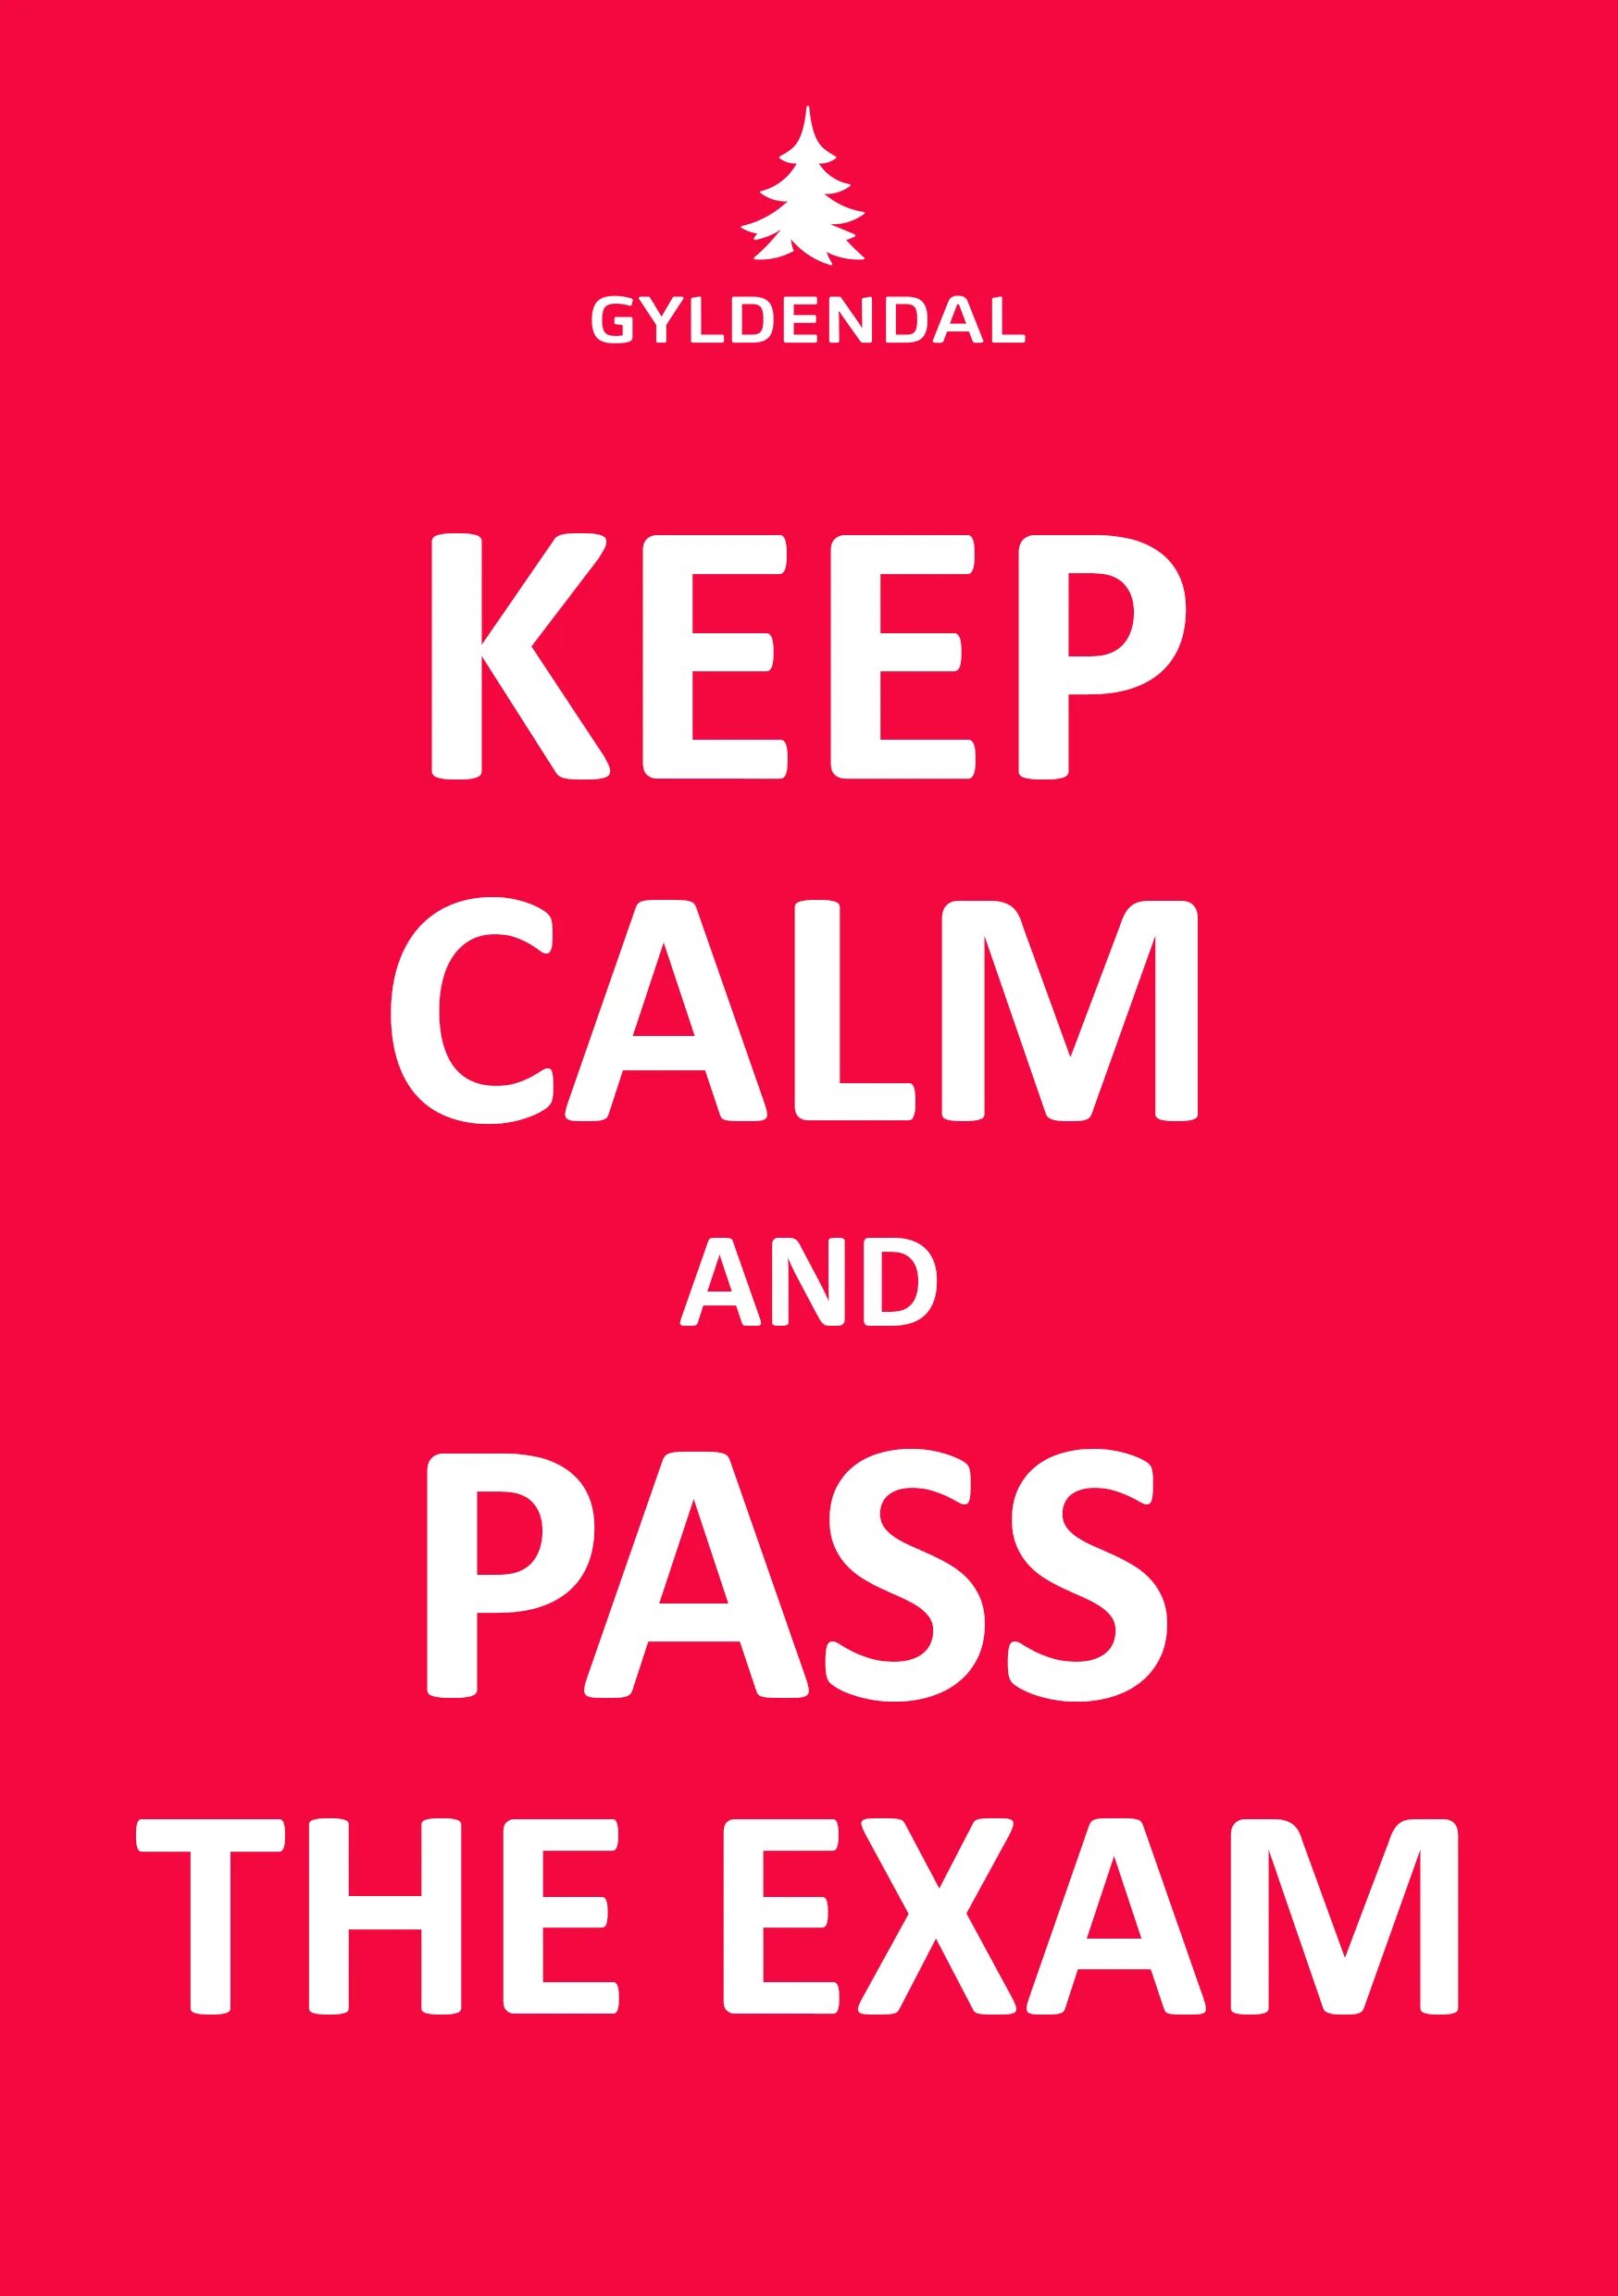 Pass exams successfully. Keep Calm and Pass the Exam. Keep Calm and Exams. To Pass an Exam.